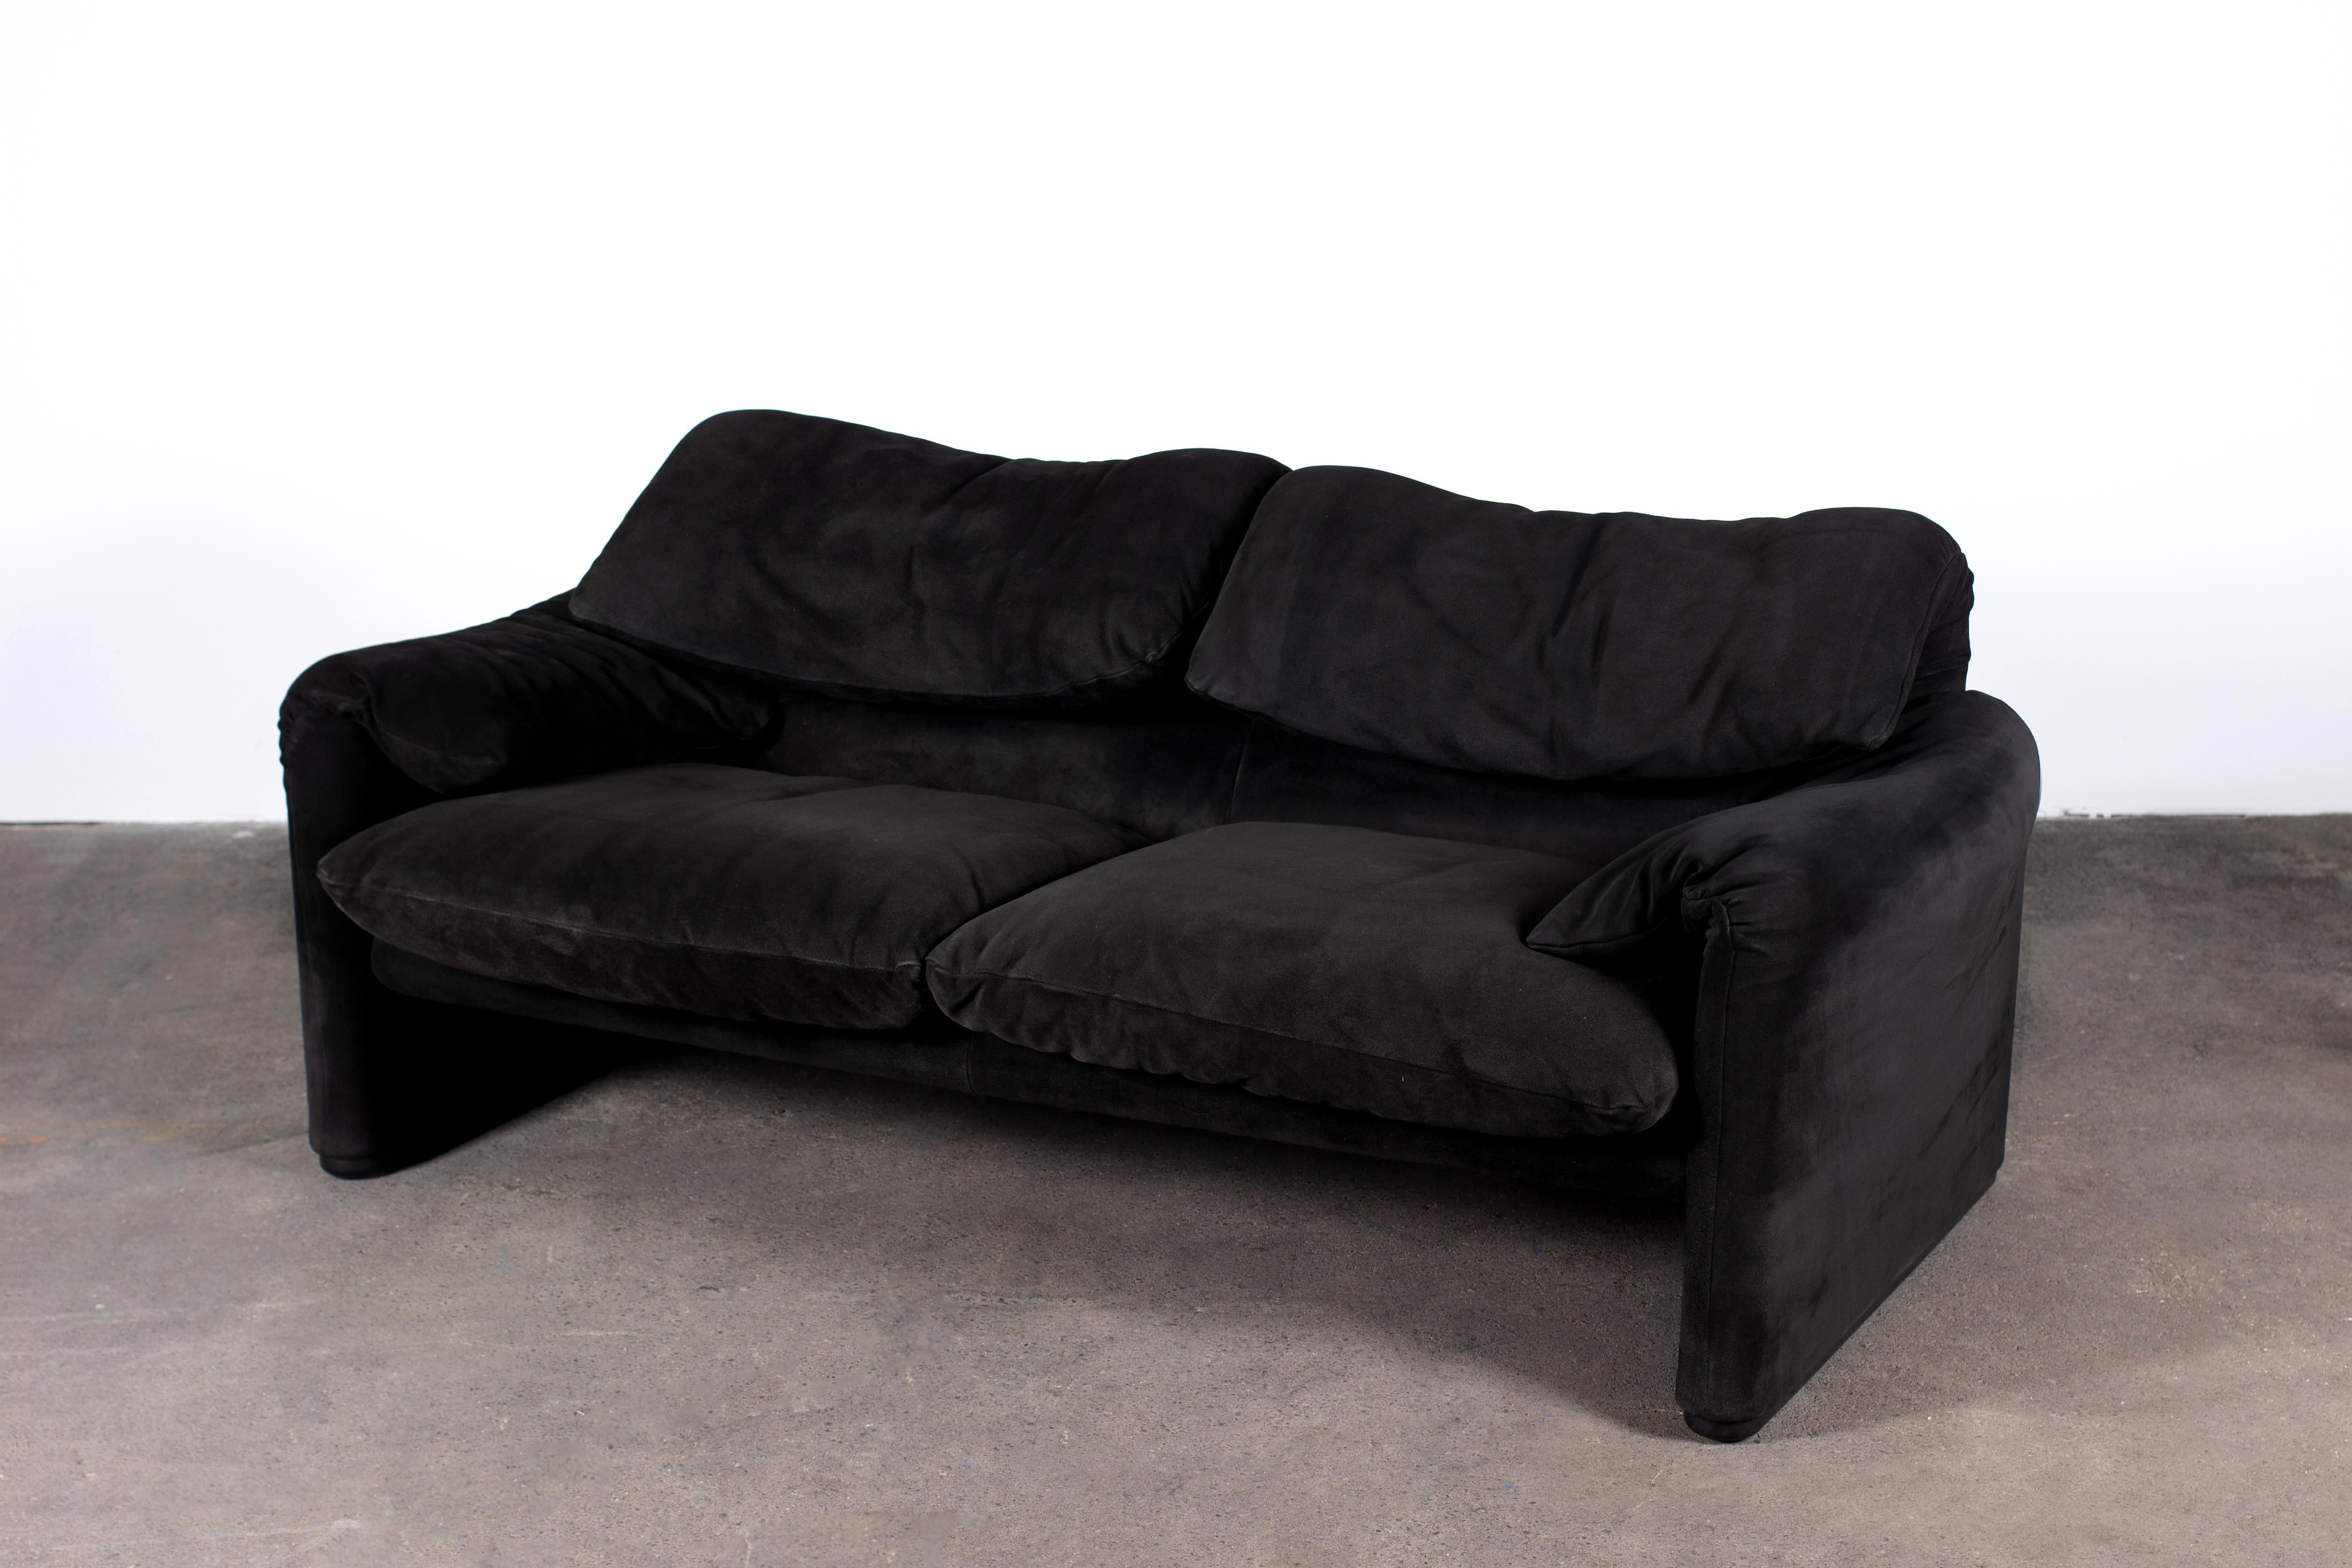 Pair of Black Suede 2-Seater Maralunga Sofas by Vico Magistretti for Cassina 17